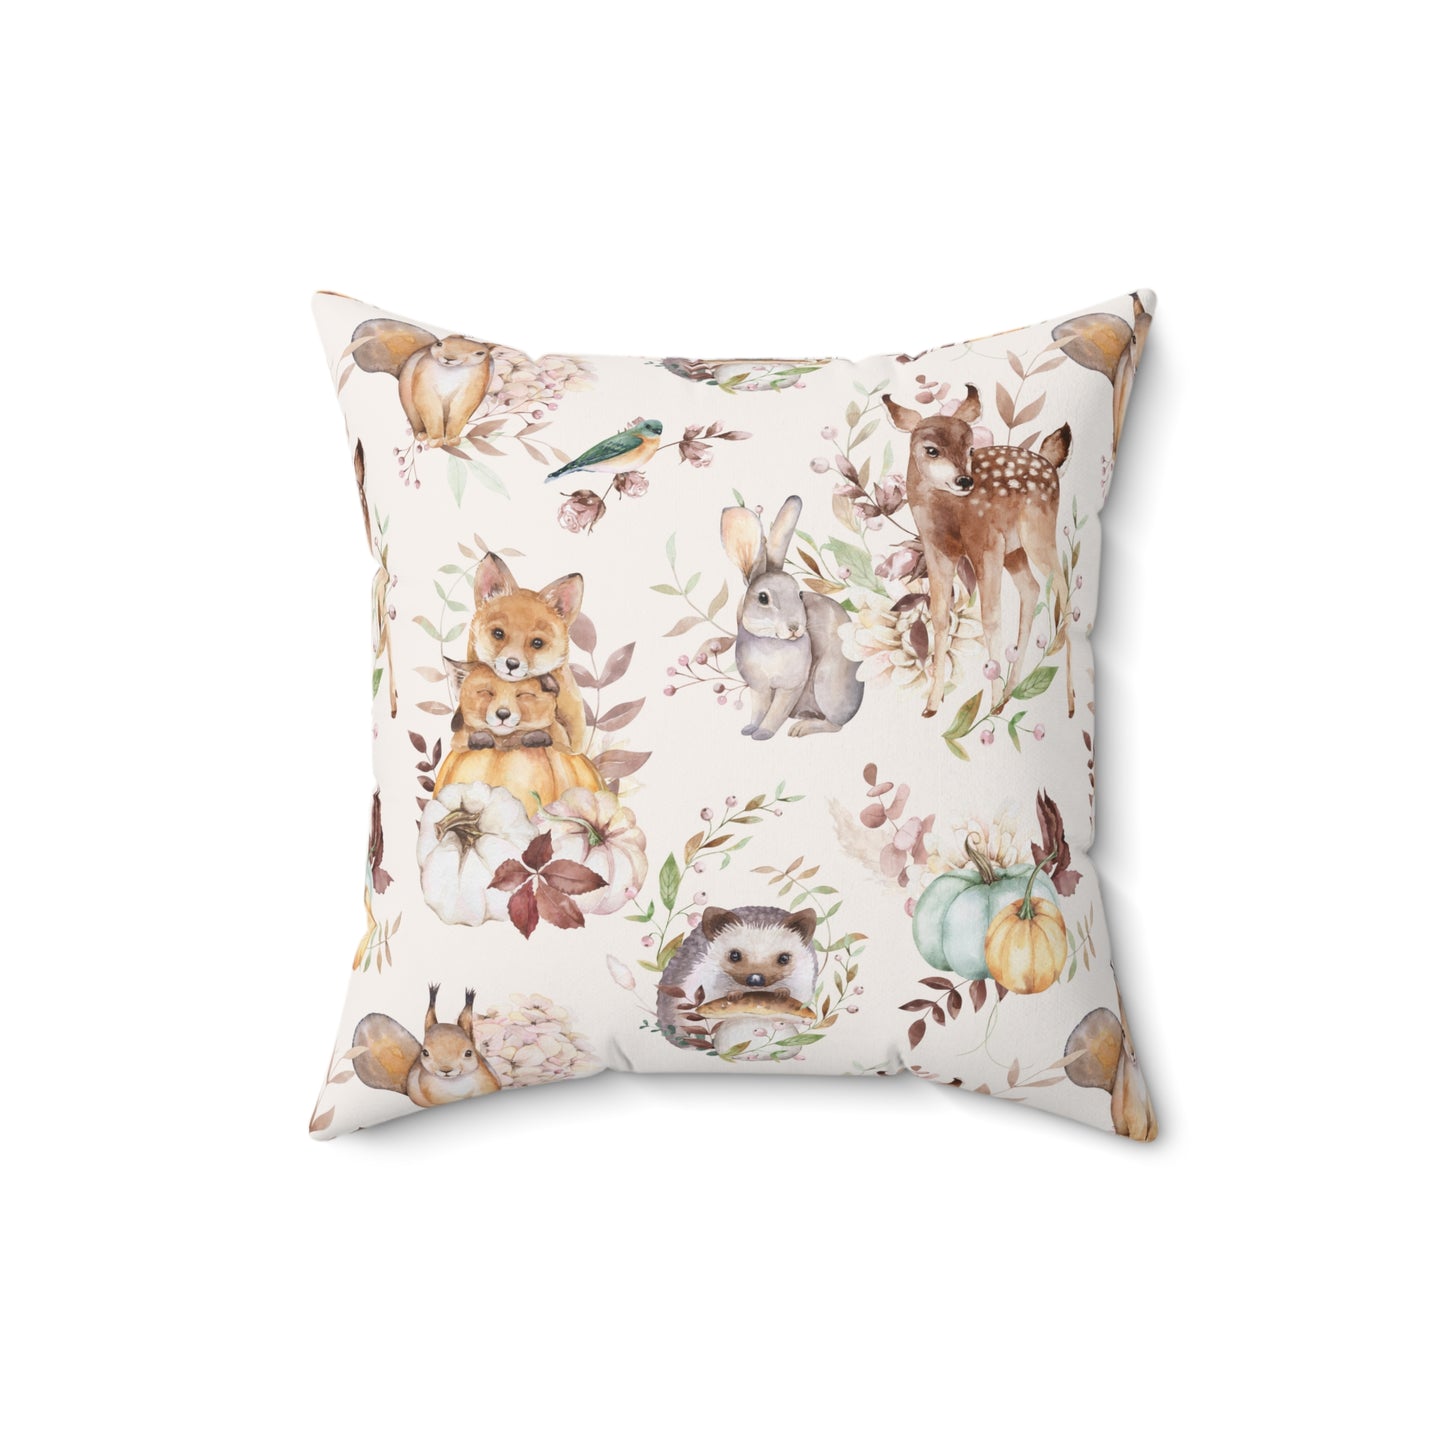 Woodland Animals Spun Polyester Square Pillow with Insert